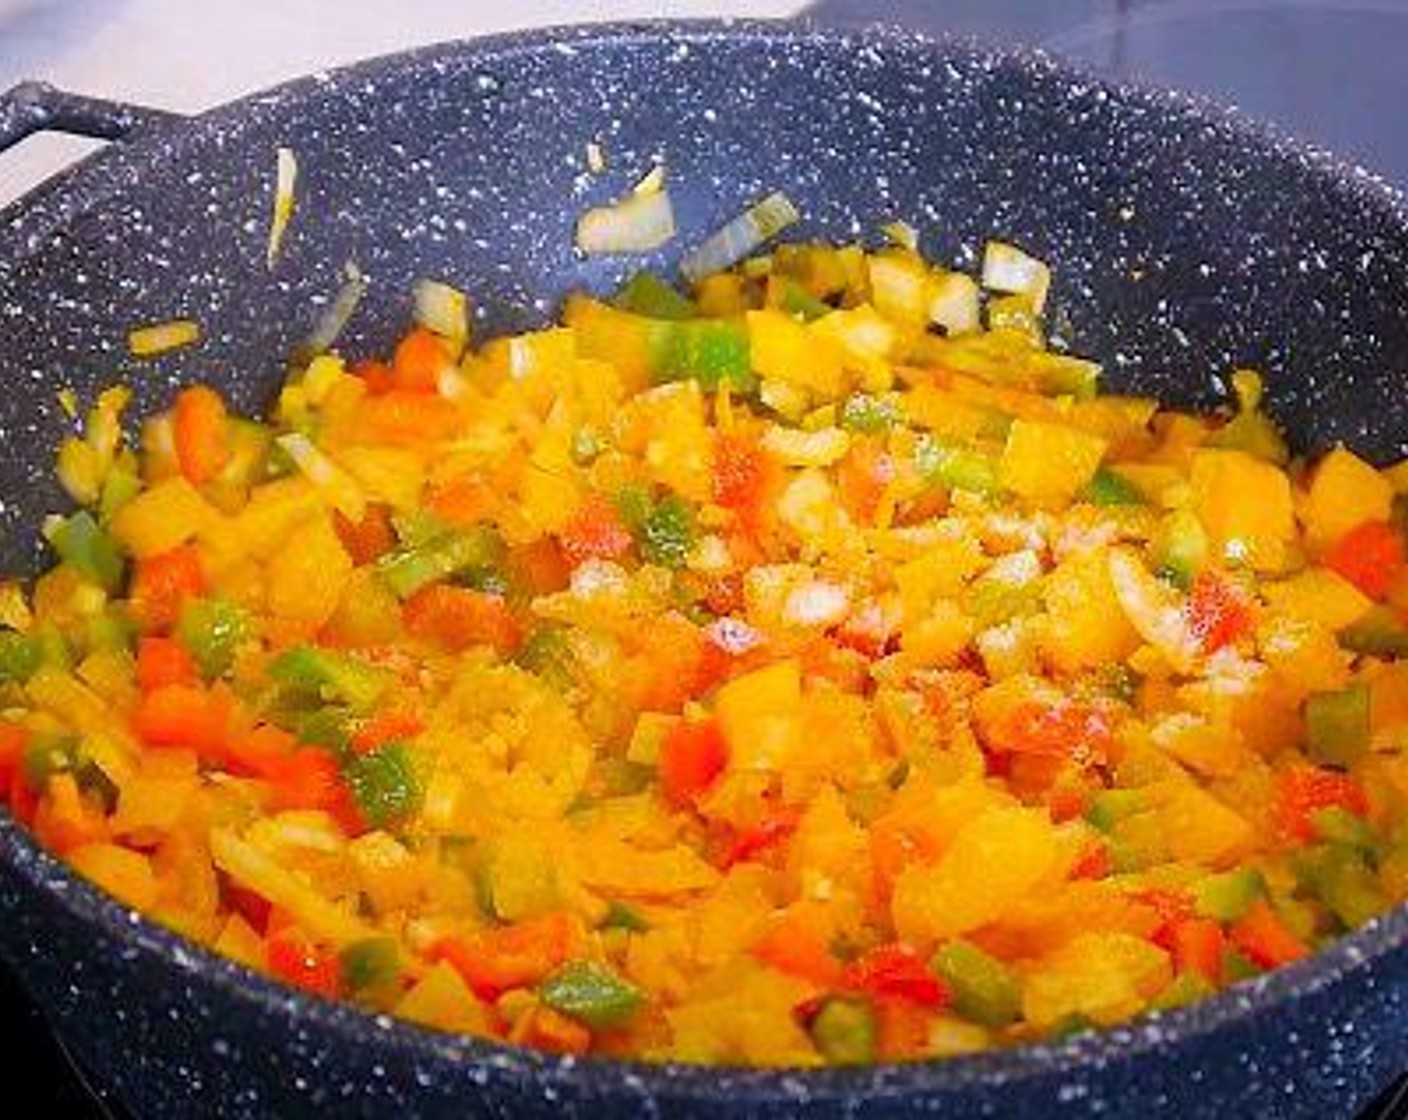 step 4 Once the oil is yellow add the Onion (1), Green Bell Pepper (1), Red Chili Pepper (1), Yellow Bell Pepper (1), and Garlic (3 cloves), and leave to cook for 10 minutes then season with Salt (to taste), Ground Black Pepper (to taste), and Ground Cumin (1 tsp).